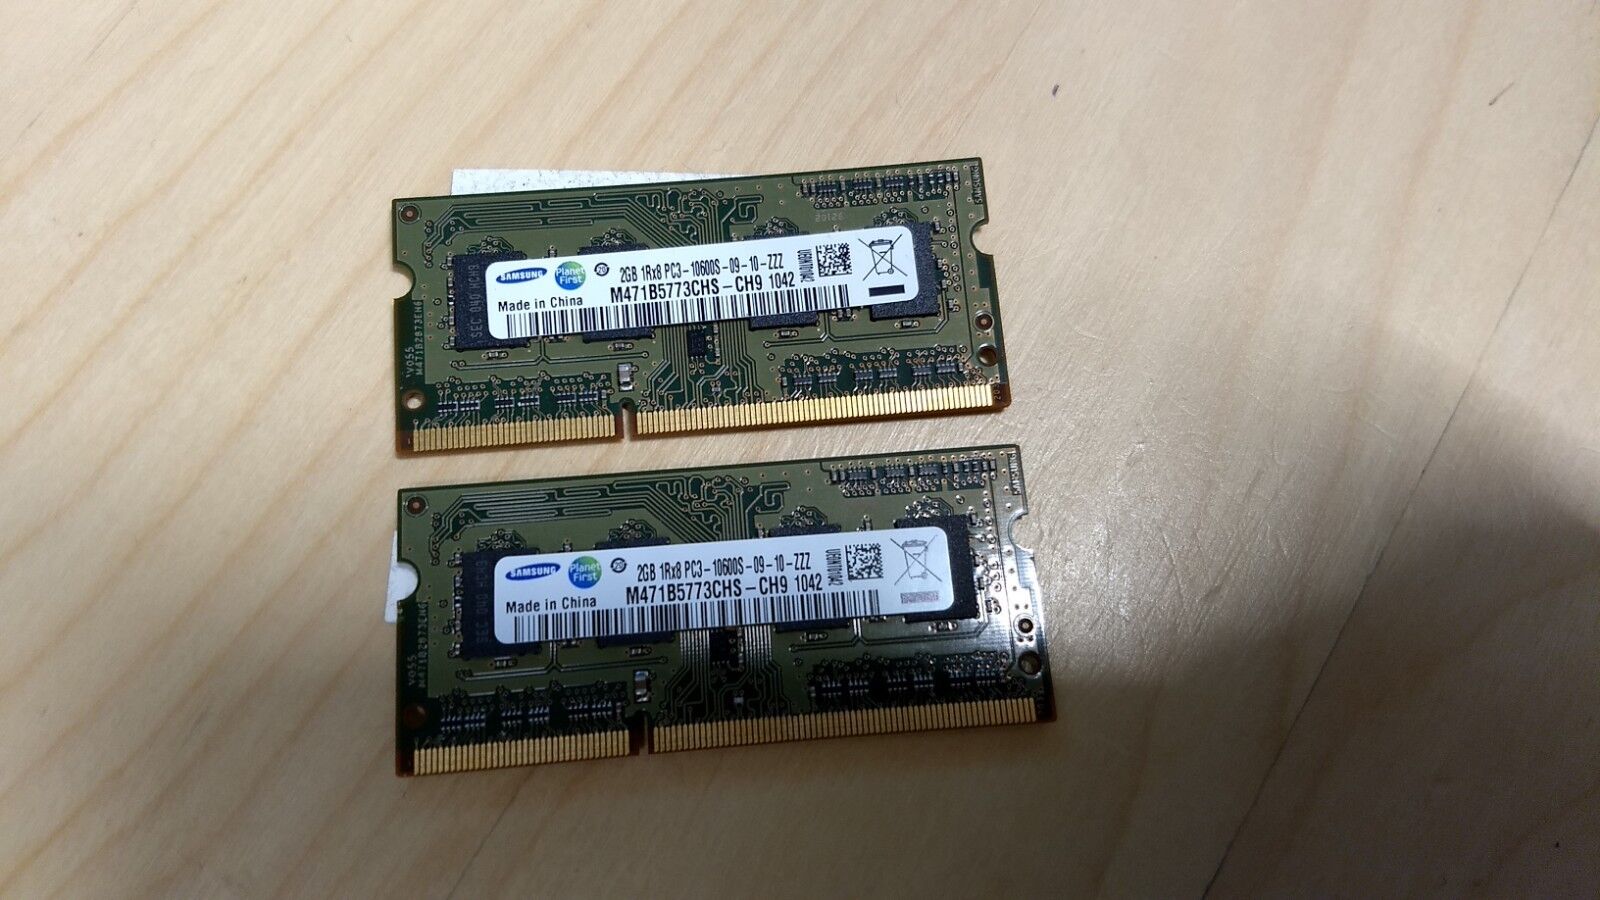 ** Pair of Samsung 2GB 1Rx8 PC3-10600S-09-10-ZZZ DDR3 SODIMMs - 4GB Total